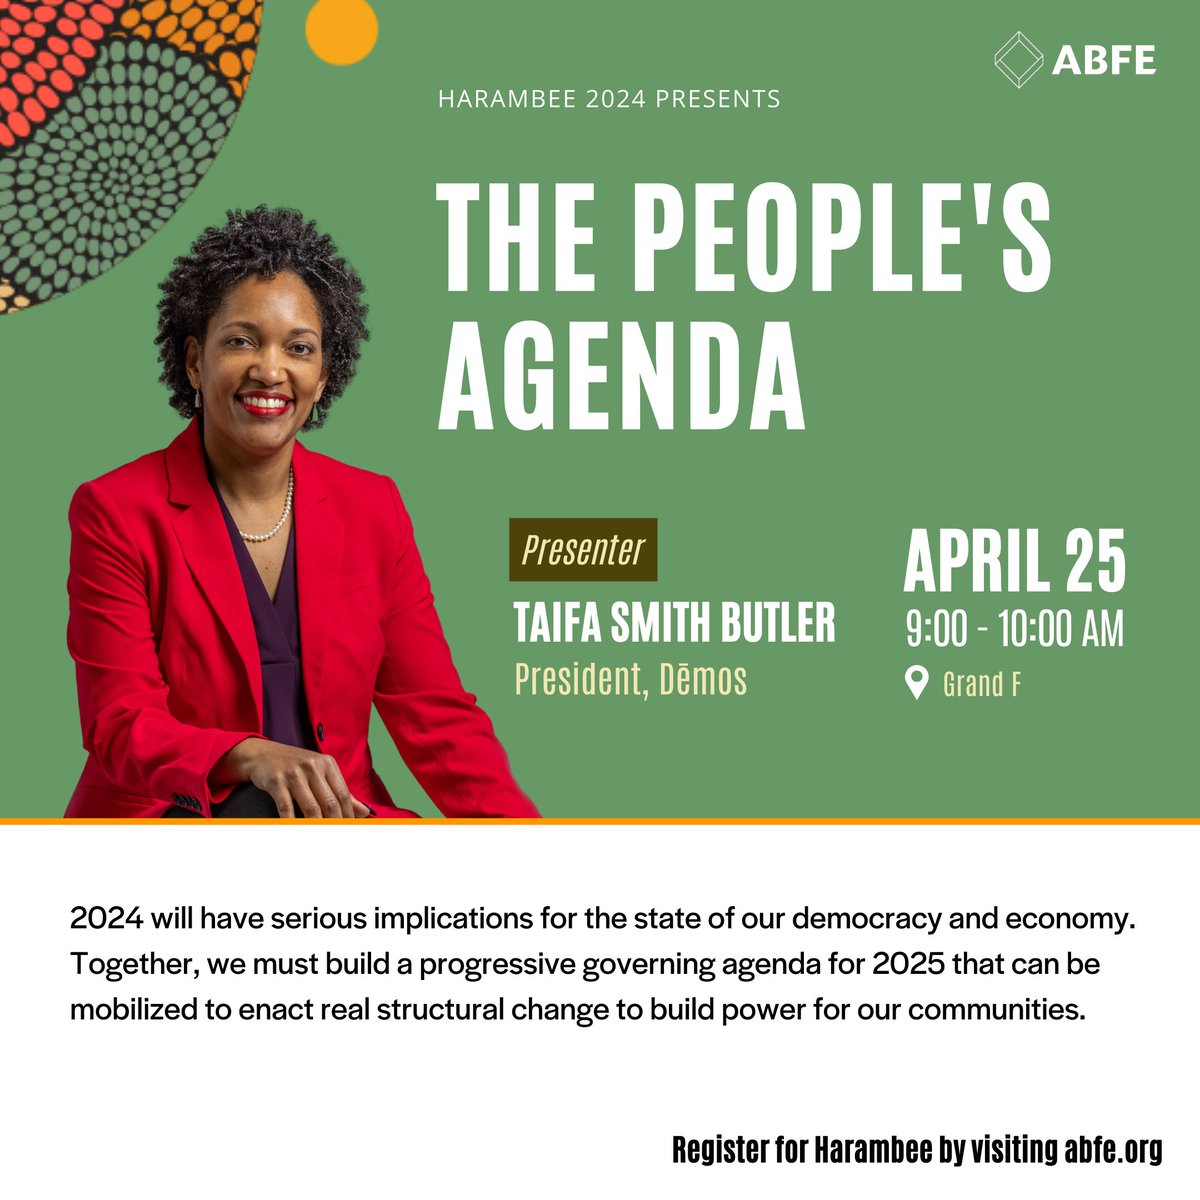 We’re excited that our very own @TaifaButler is presenting @ABFE this year 👏🏽  If you're attending, don't miss her talk on what we must do to build a progressive governing agenda for 2025.